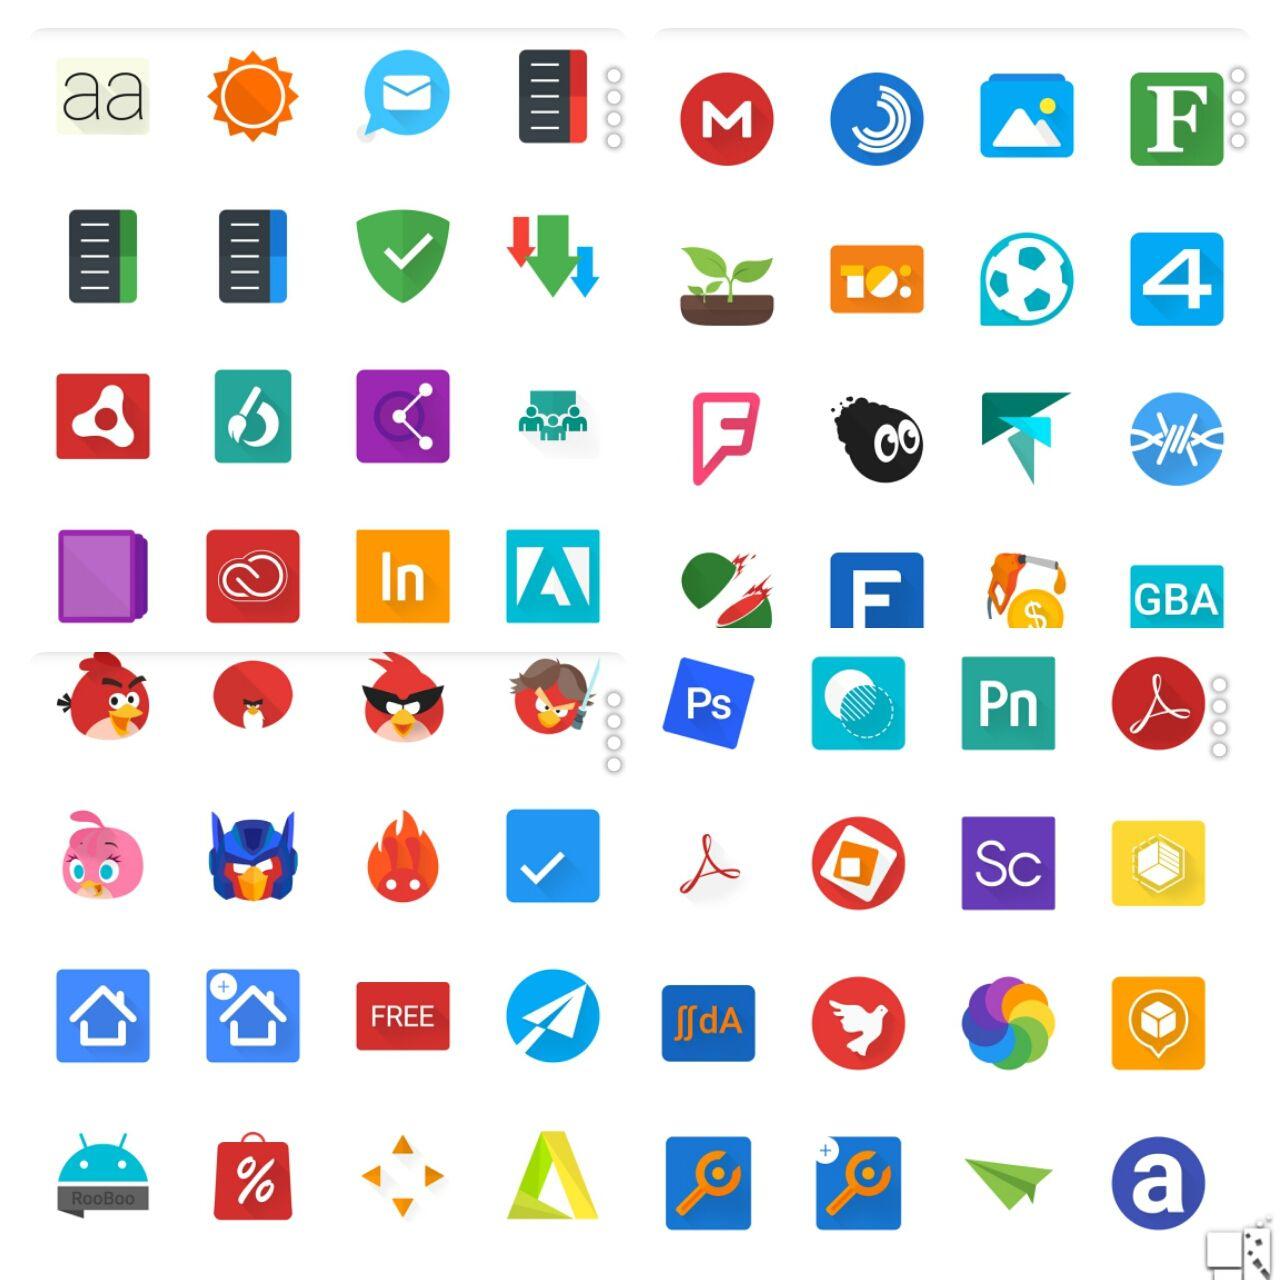 Popular App Logo - 5 ICON PACKS THAT YOU SHOULD HAVE | TechandroidBlogs